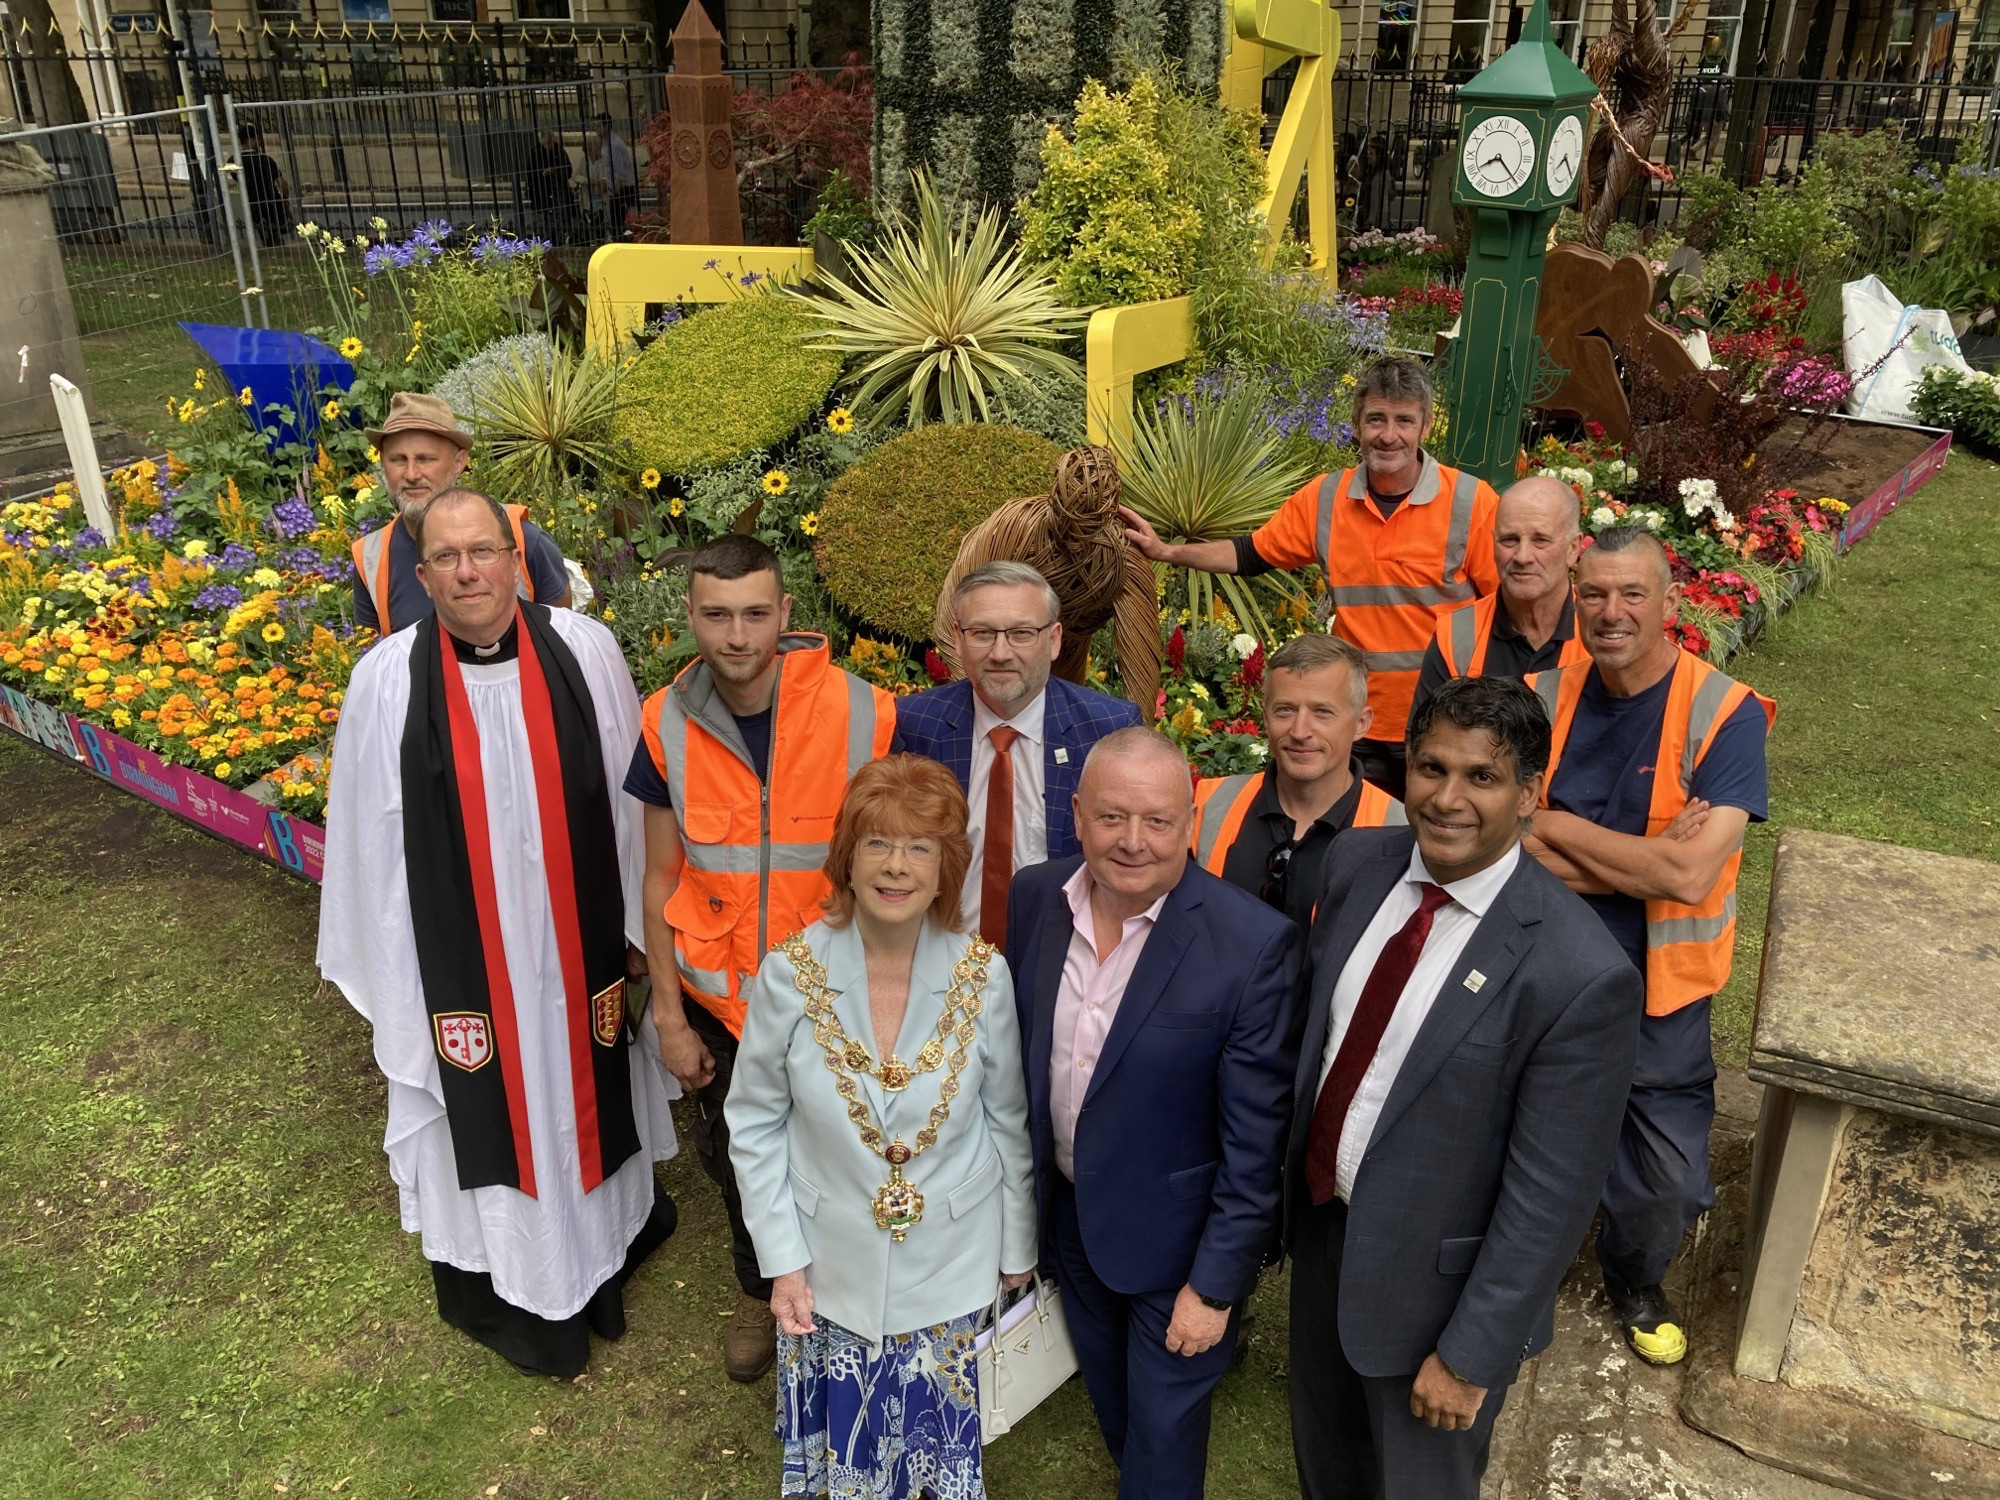 Commonwealth Games floral display opens at Birmingham Cathedral